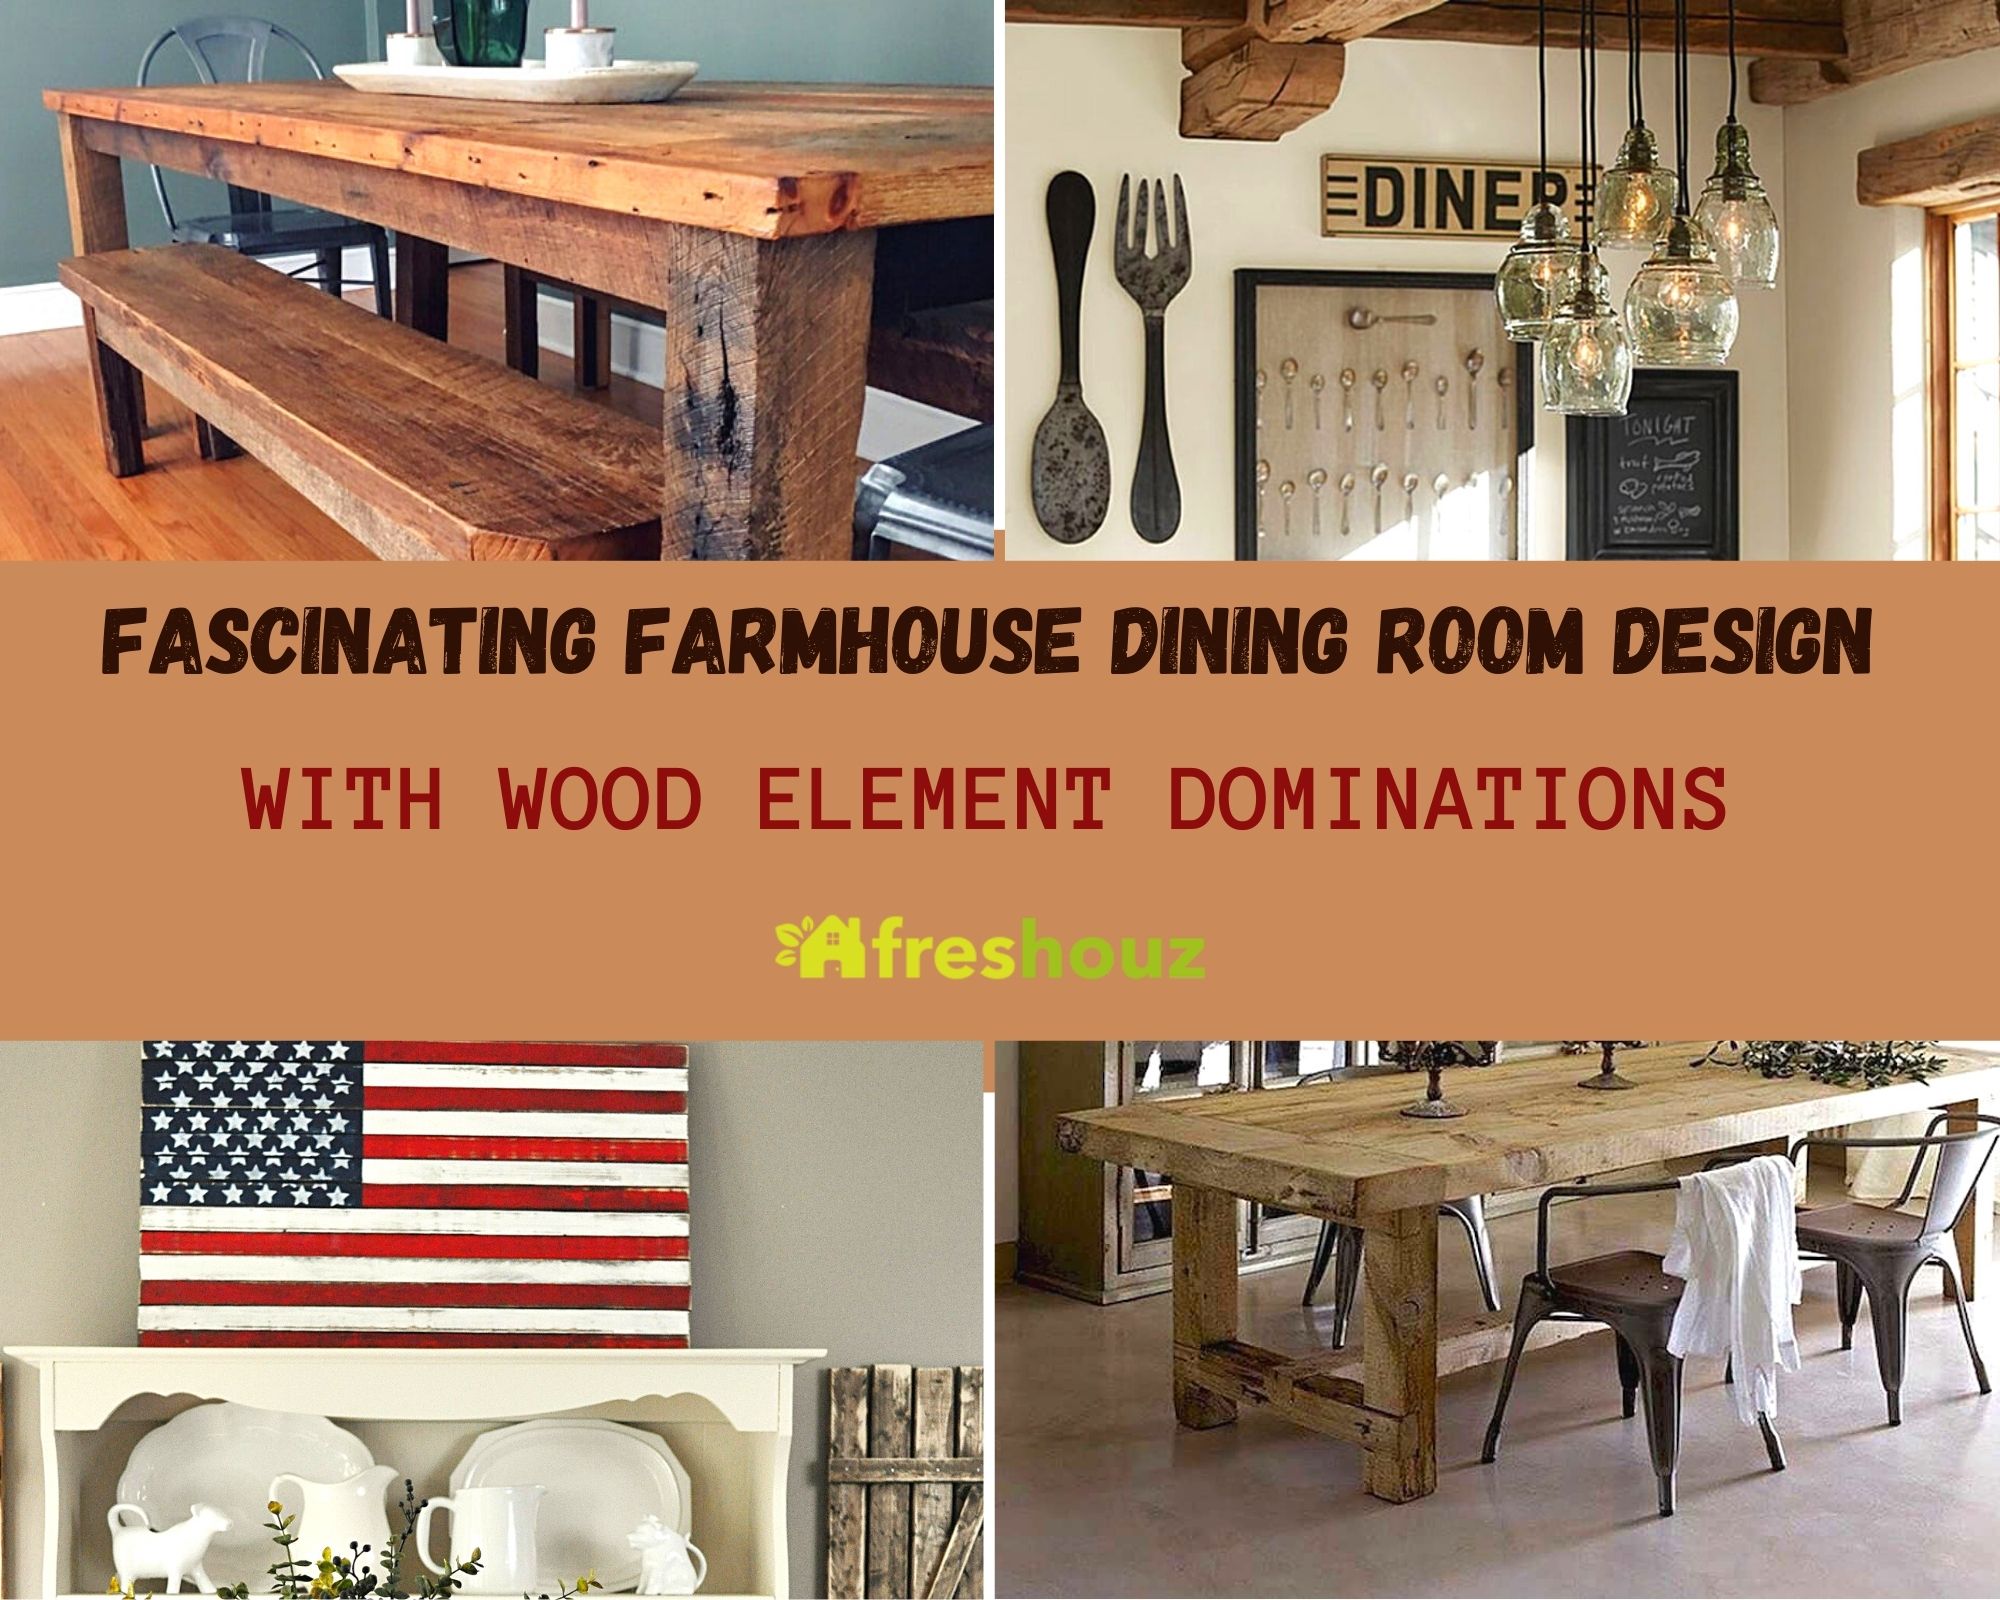 Fascinating Farmhouse Dining Room Design With Wood Element Dominations